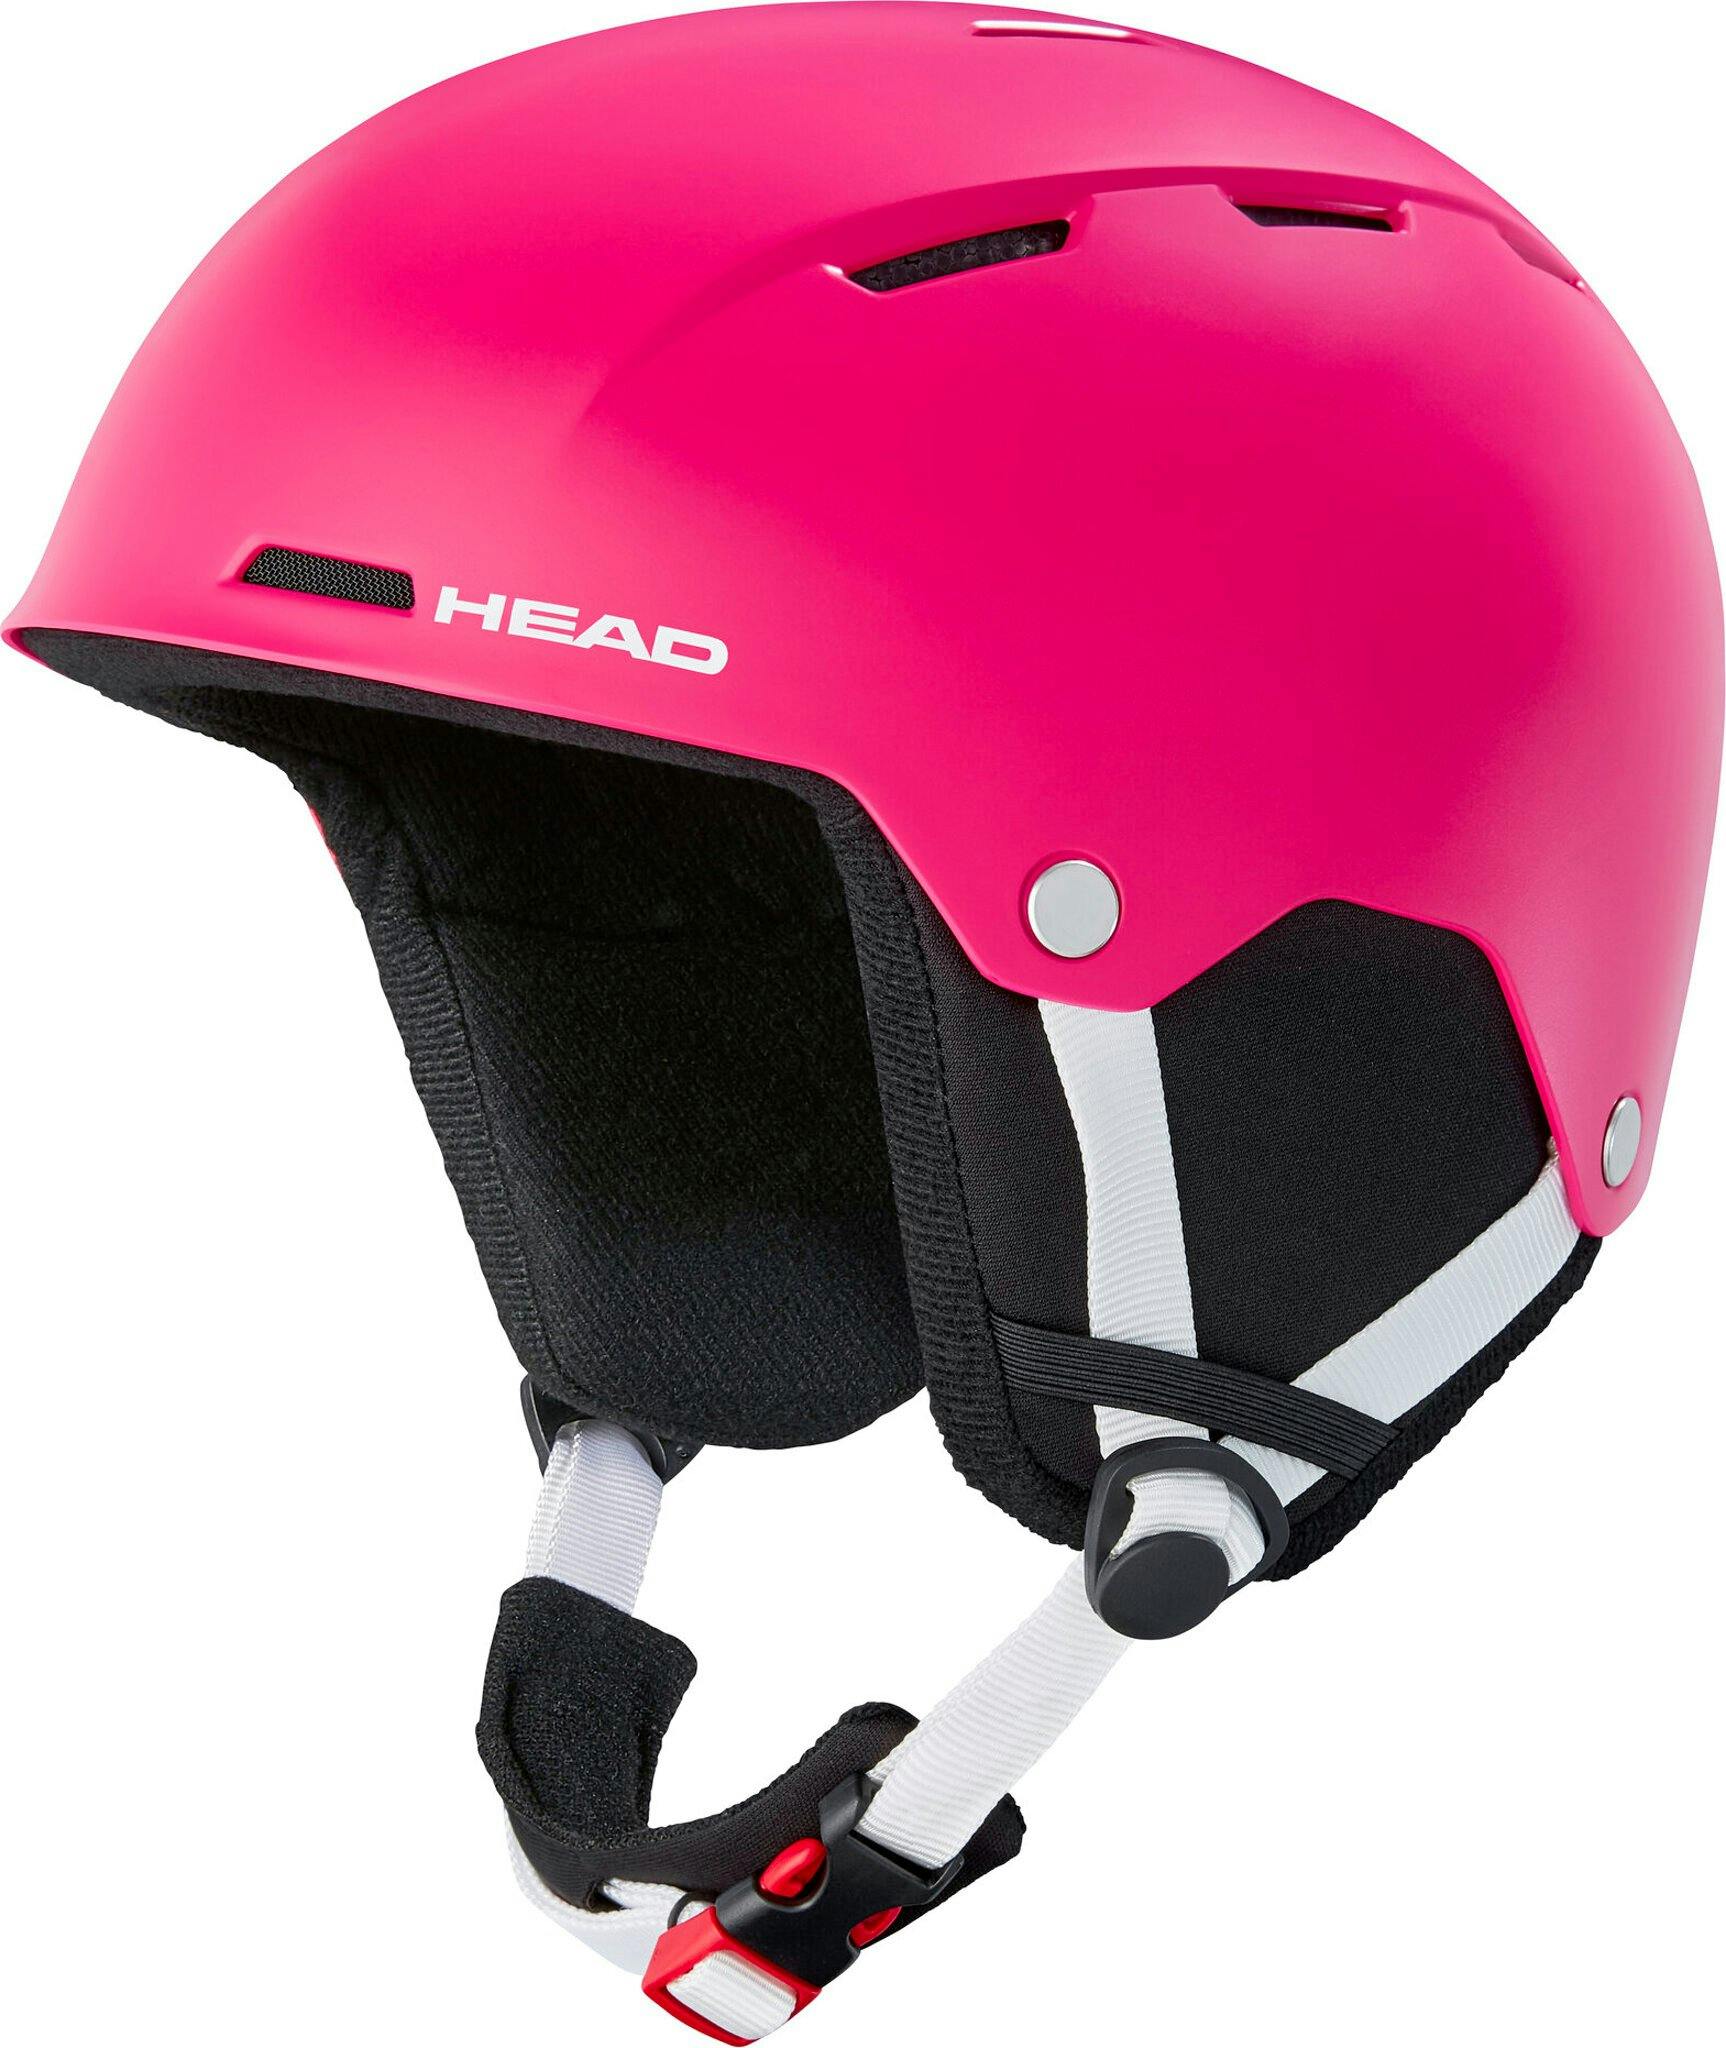 Product image for Taylor Ski Helmet - Youth